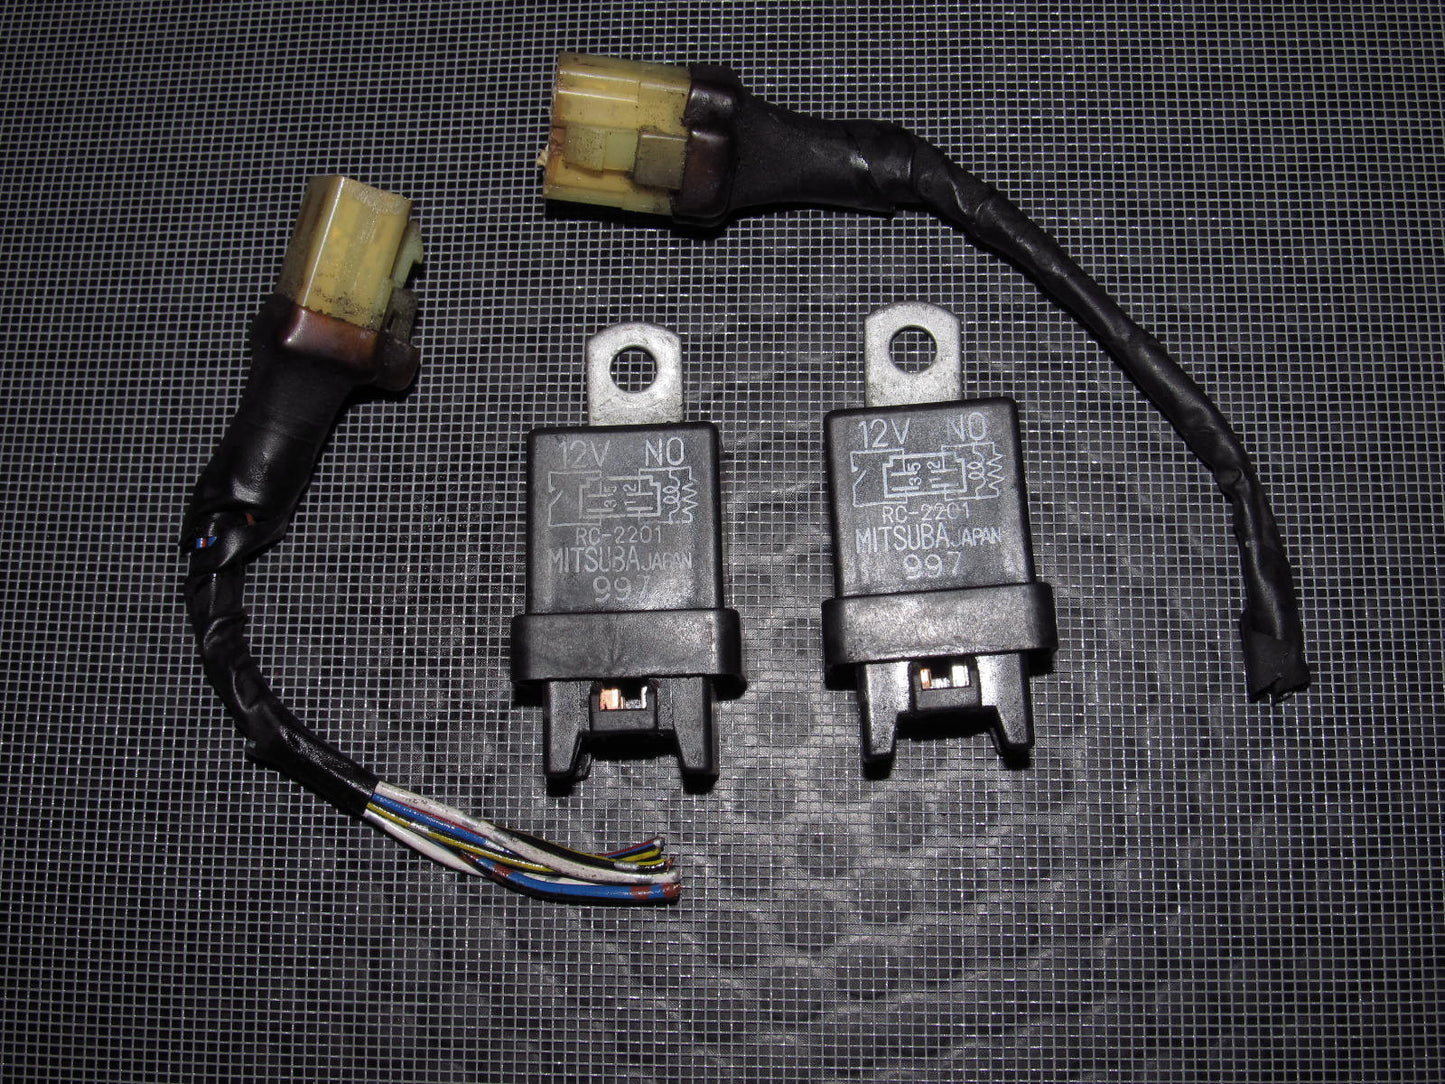 Honda & Acura Universal Relay RC-2201 with Harness & Bracket 2 pieces